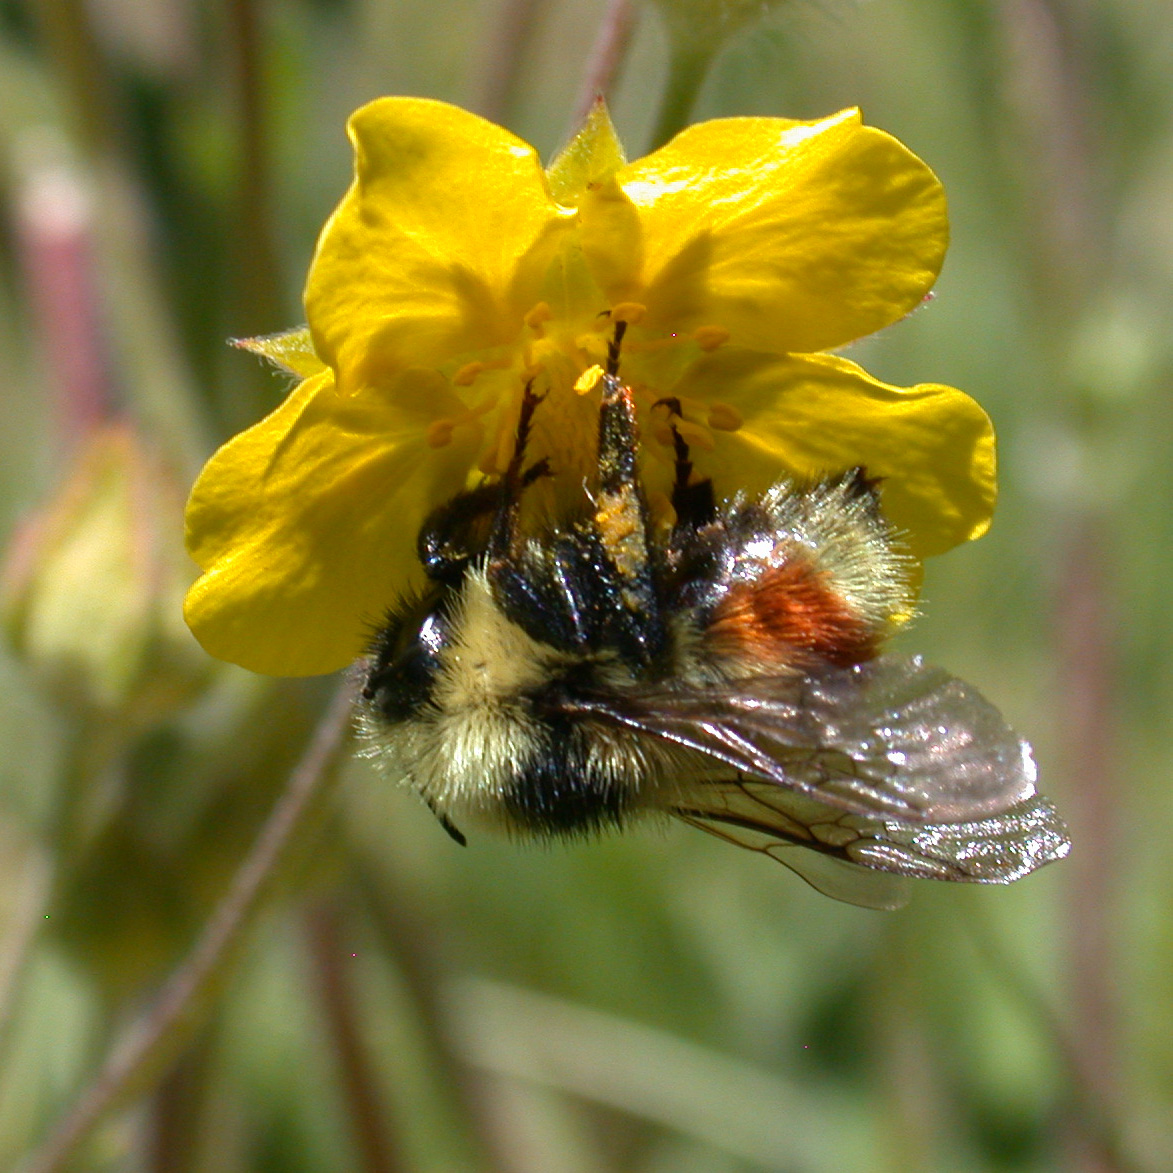 A bumble bee with fuzzy, somewhat distinct body segments, clings to a yellow flower.